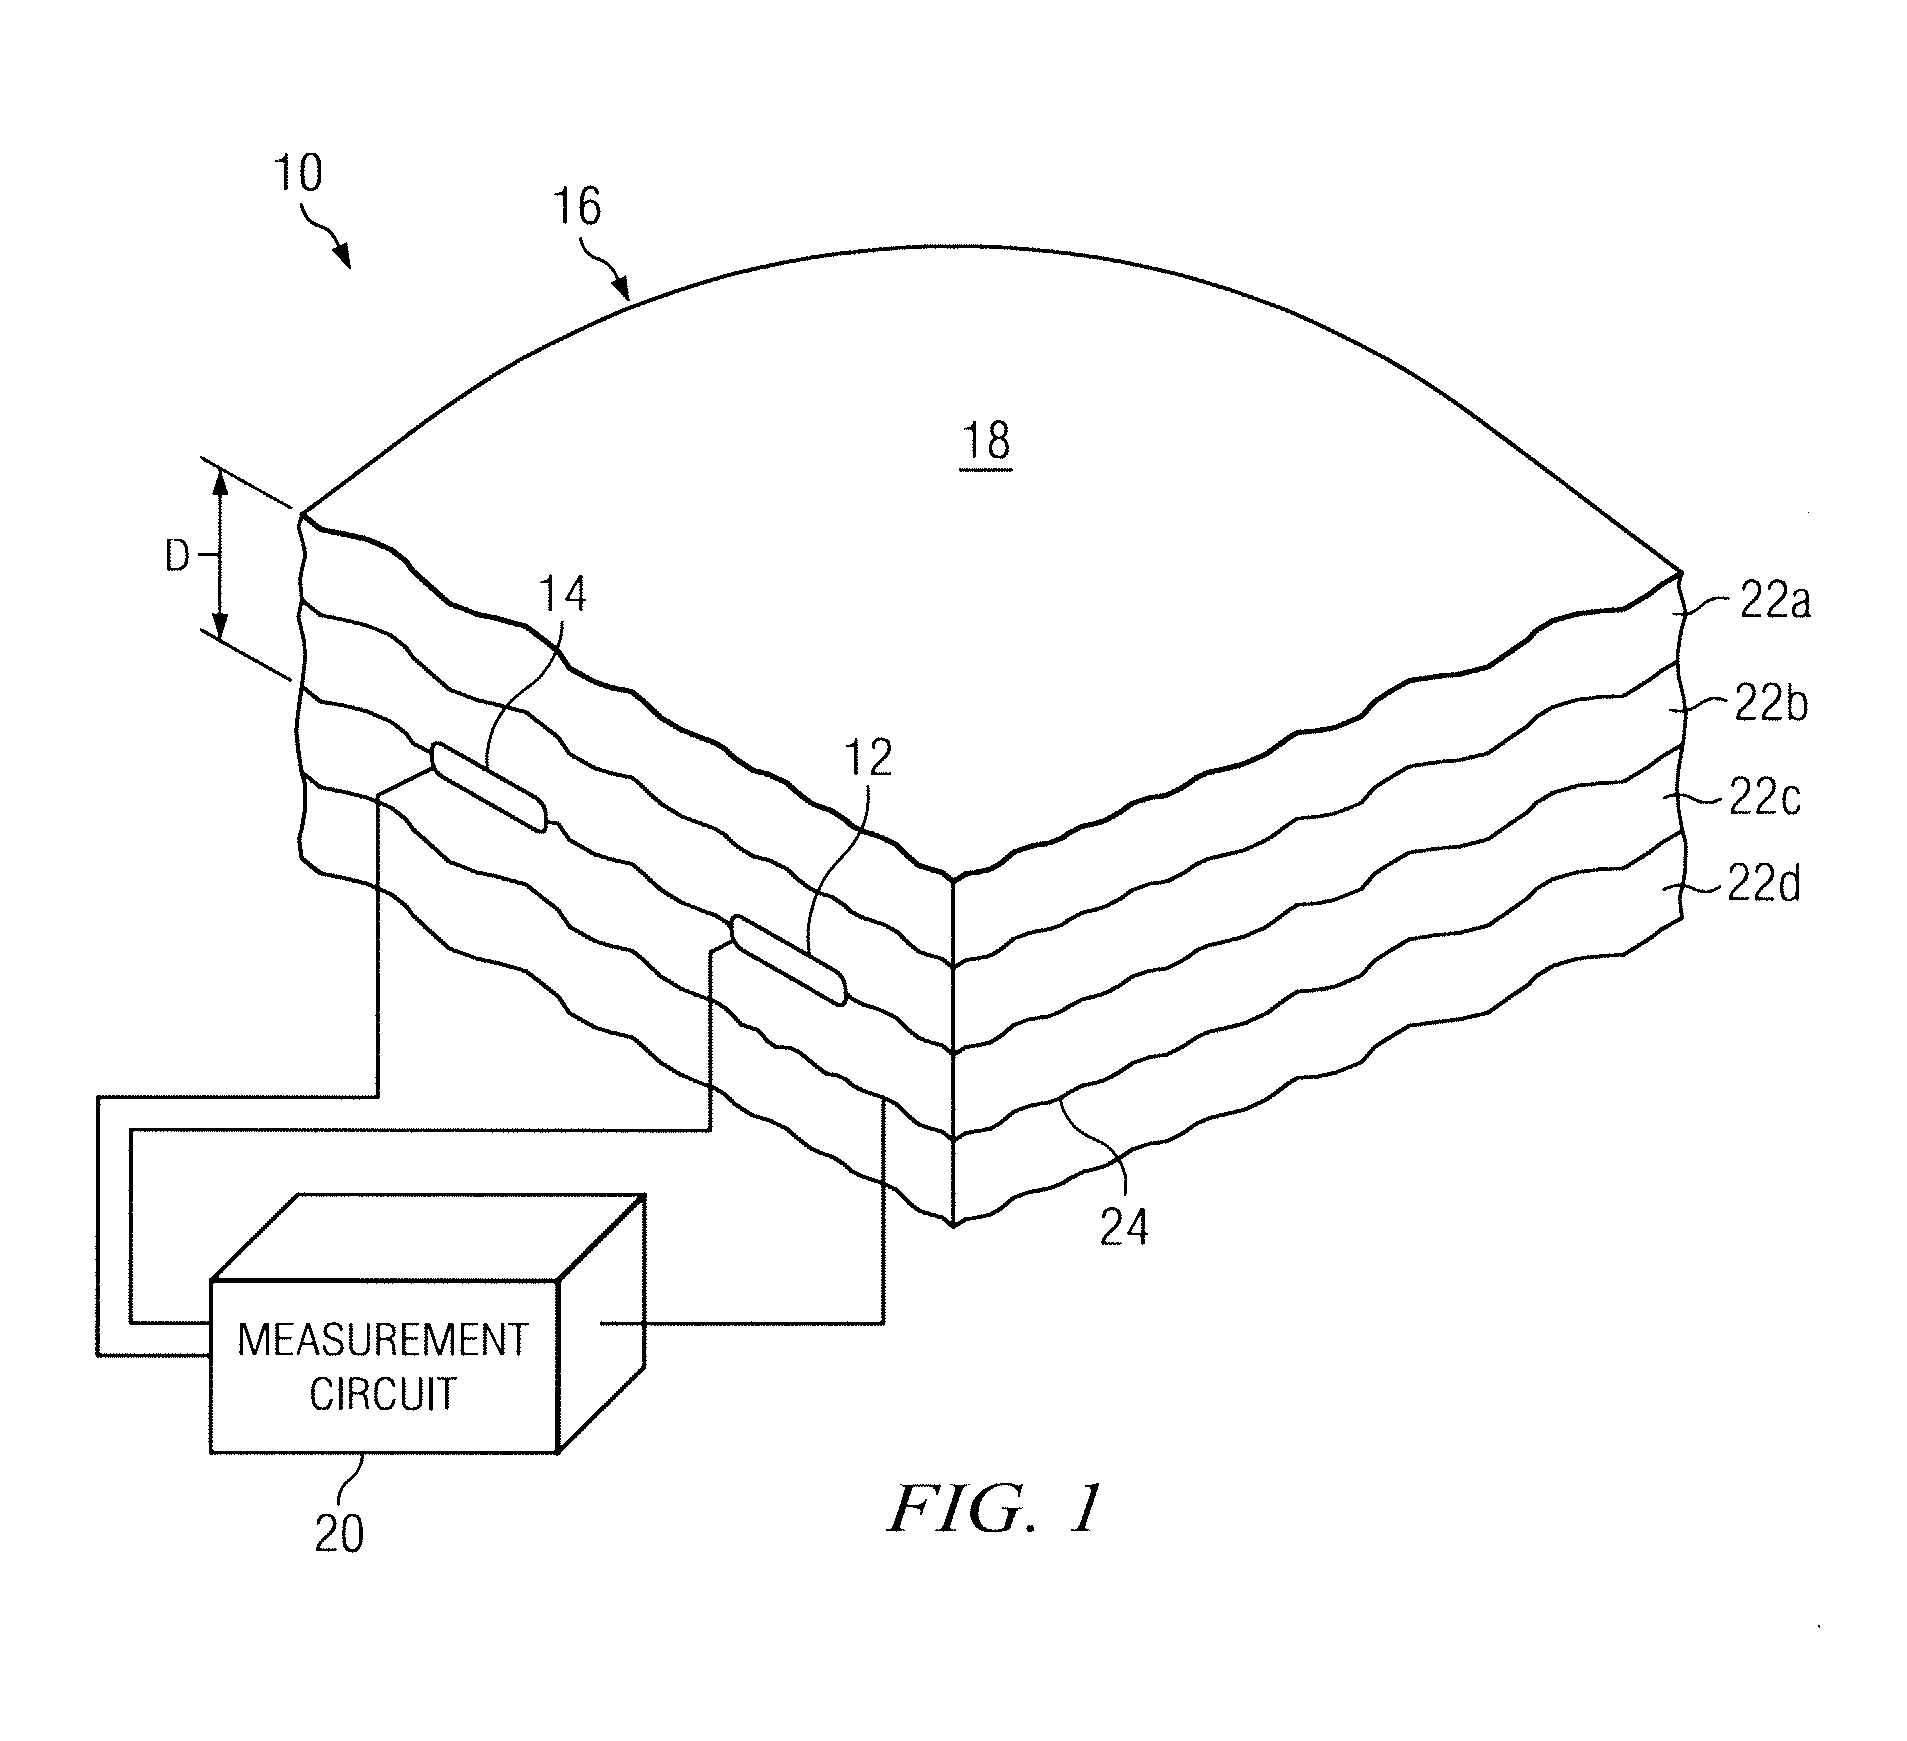 Apparatus for Remotely Measuring Surface Temperature Using Embedded Components